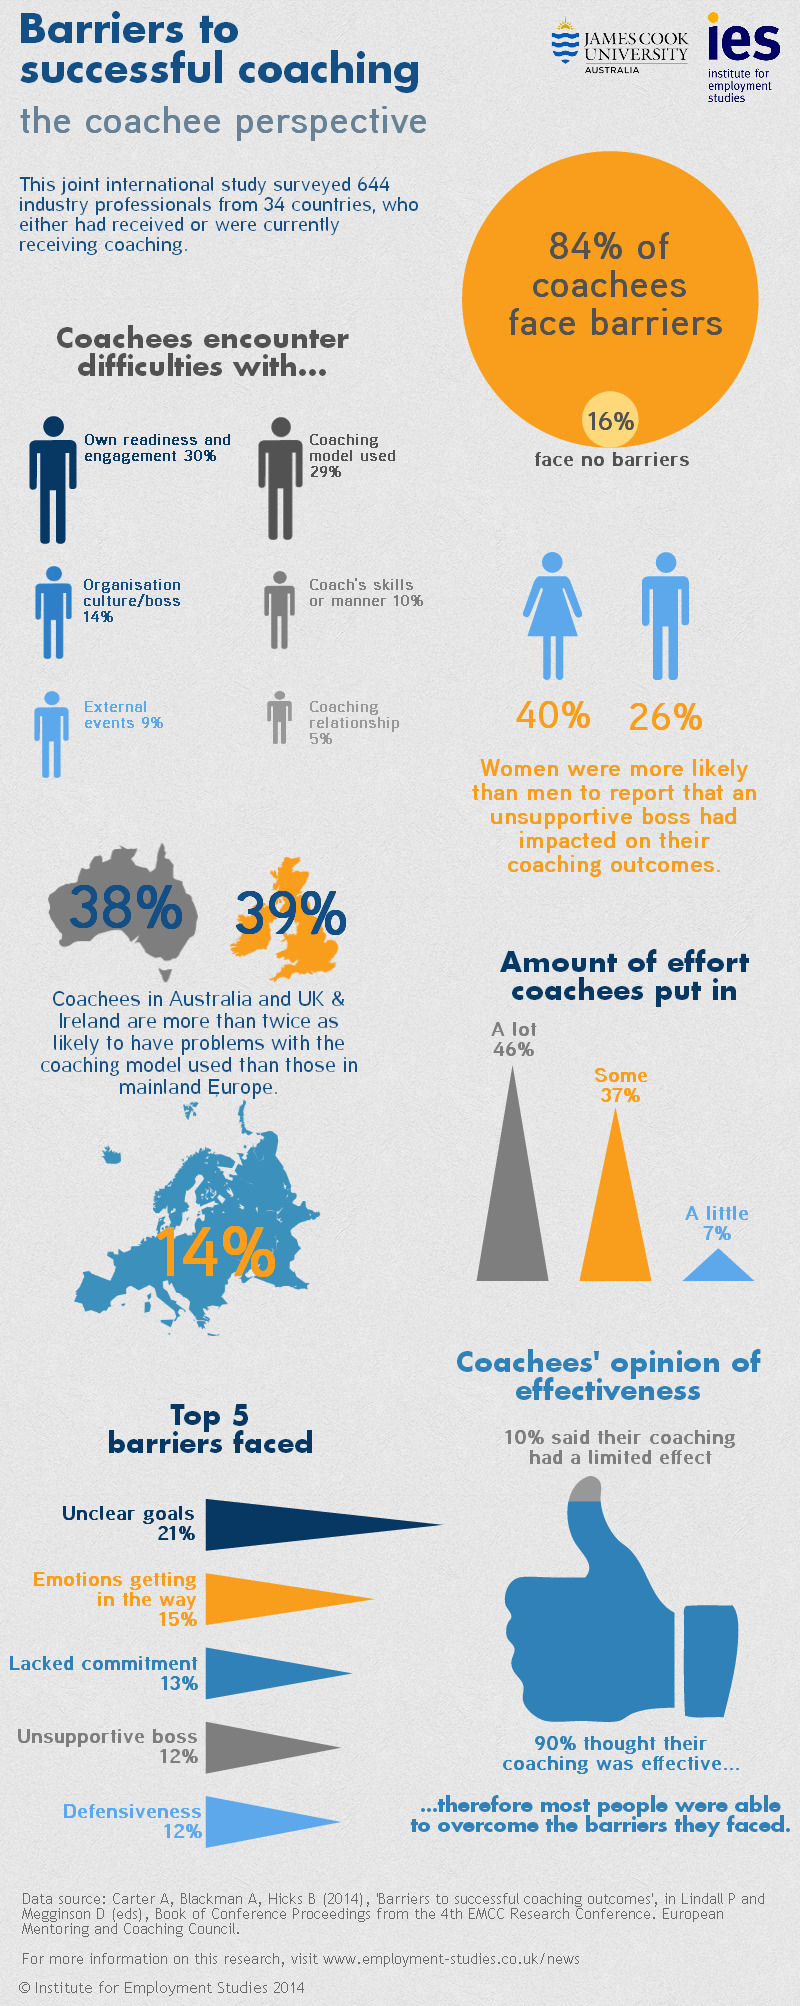 Barriers to successful coaching infographic